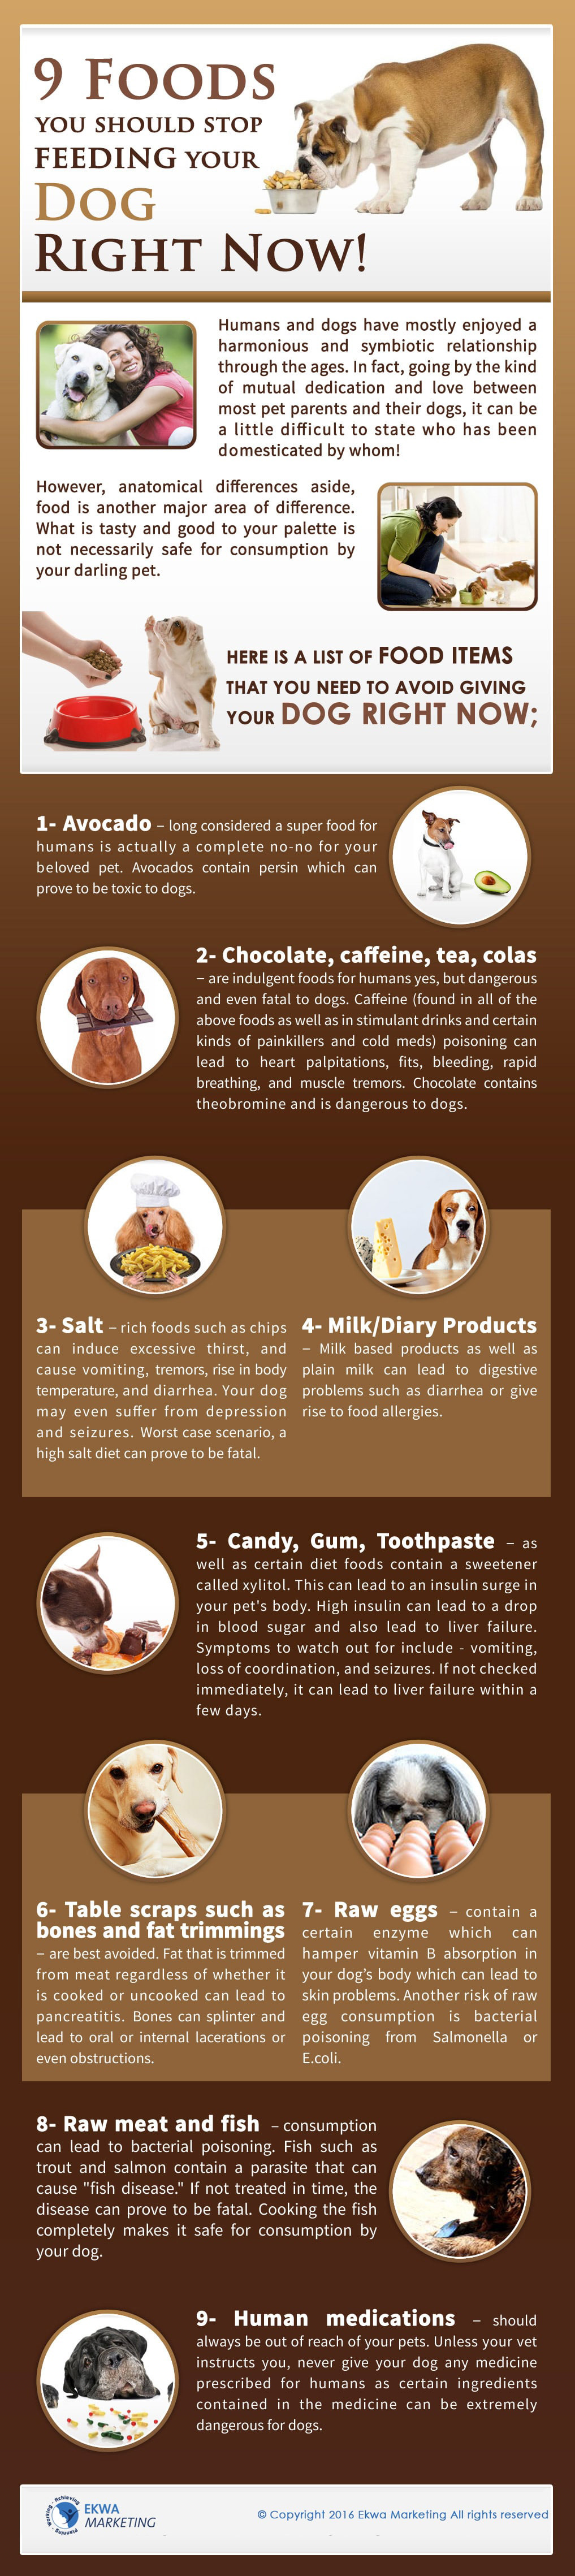 Veterinary Info Graphics, 9 foods you should stop feeding your dog now